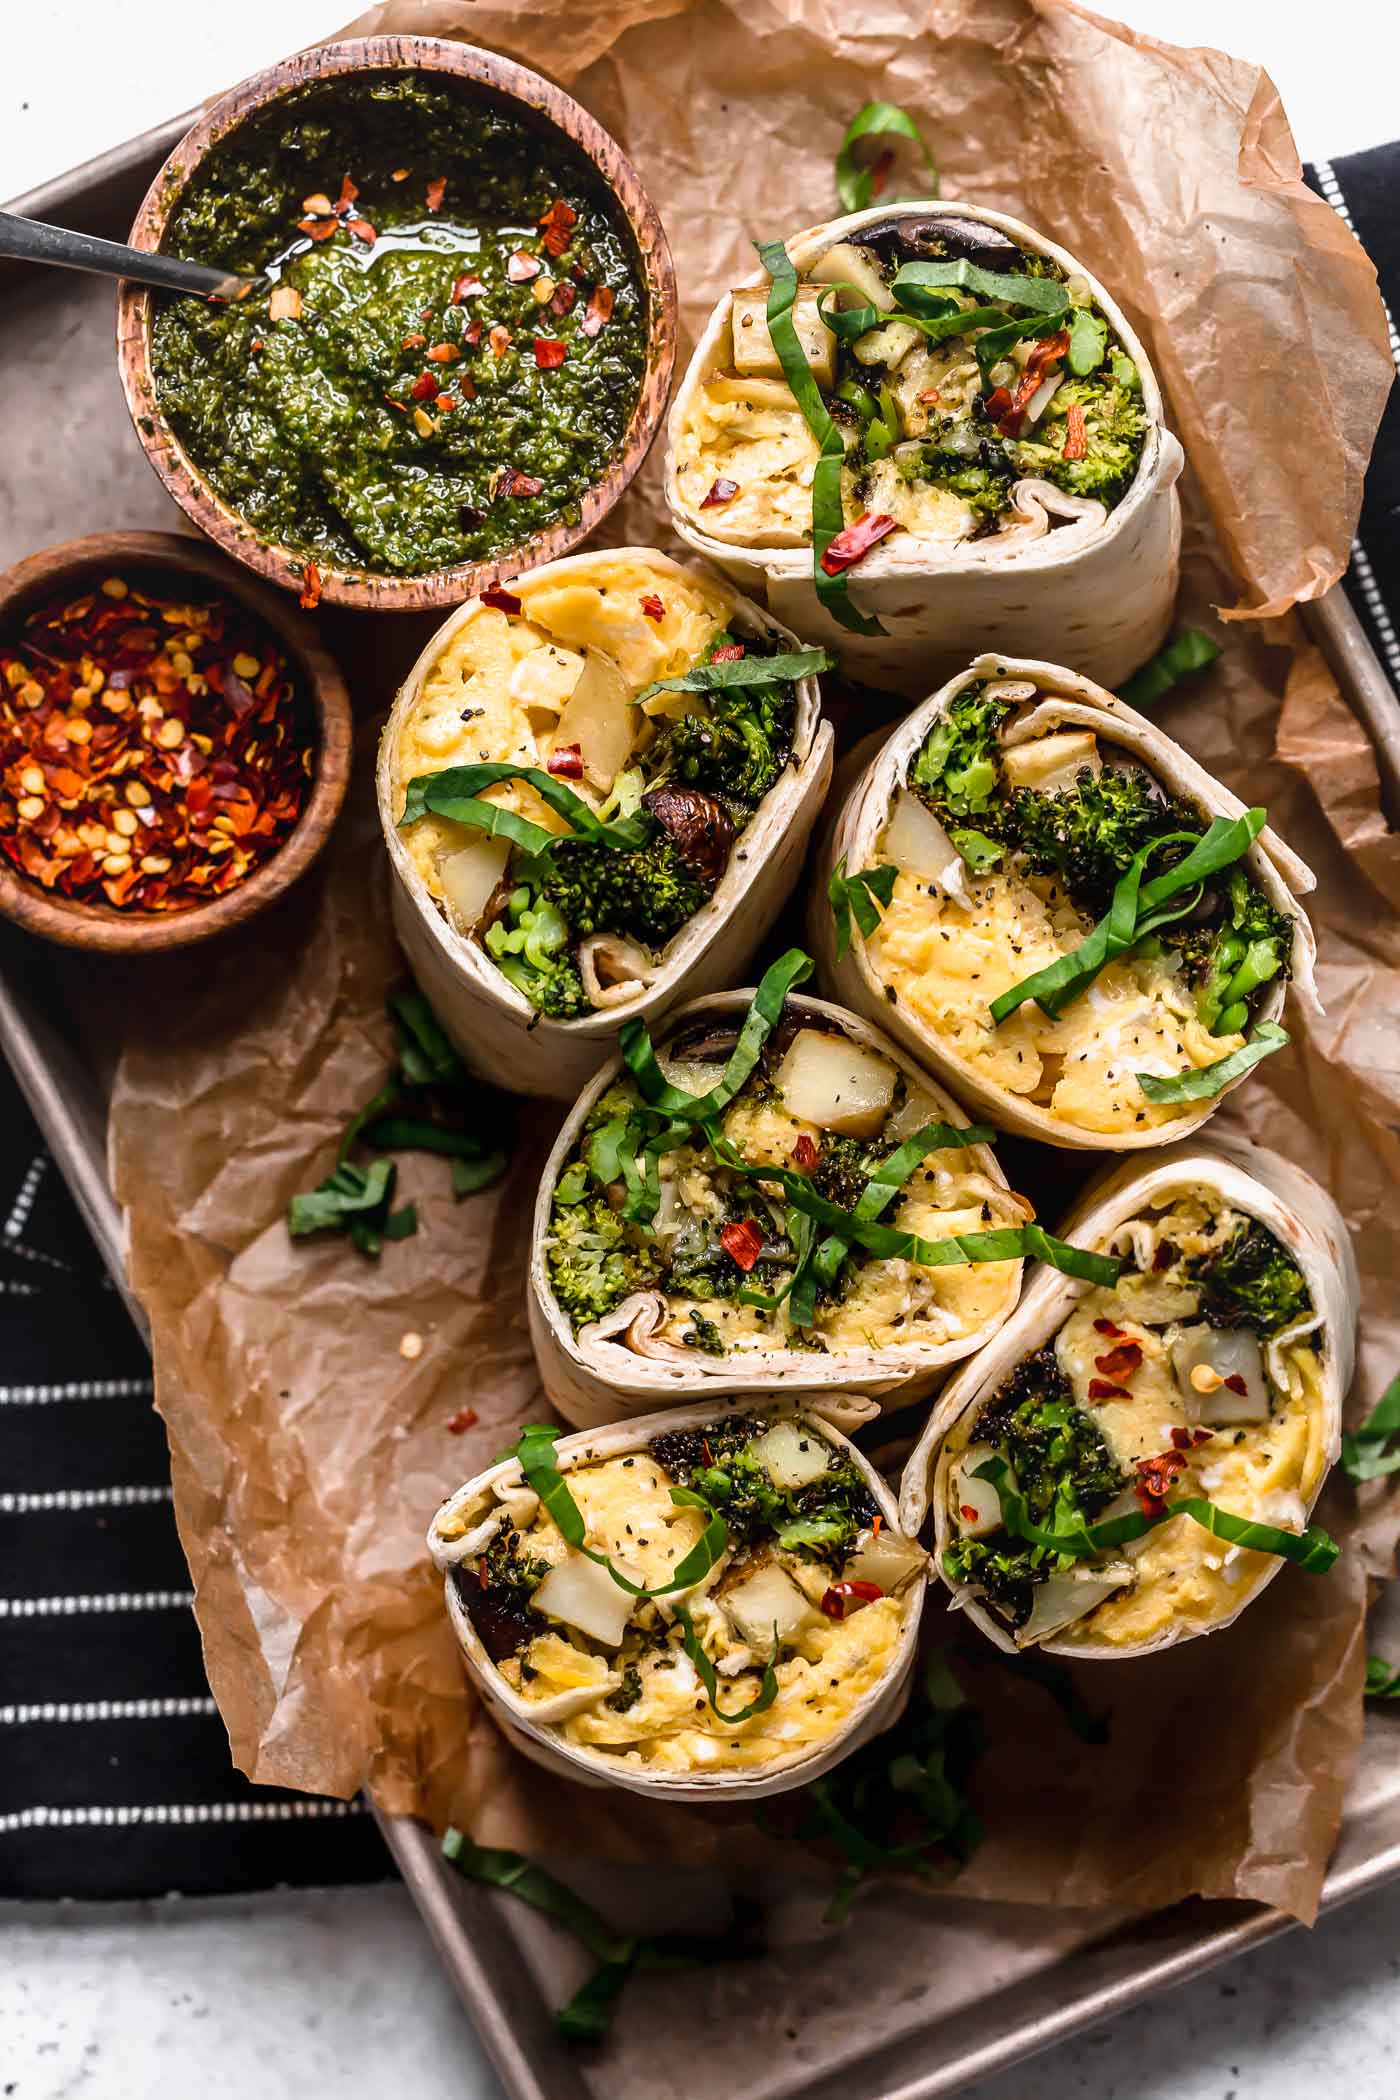 an easy vegetarian breakfast burritos recipe, filled with soft-scrambled eggs, cheese, roasted broccoli, mushrooms & potatoes, & a drizzle of fresh pesto for freshness. pesto roasted veggie vegetarian breakfast burritos are the perfect healthy make-ahead breakfast for weekdays! (meal prep & freezer-friendly) #breakfastburritos #vegetarianbreakfastburritos #easybreakfastburritos #makeaheadbreakfast #freezerbreakfastburritos #breakfastrecipes #makeaheadbreakfastrecipes #easybreakfastrecipes